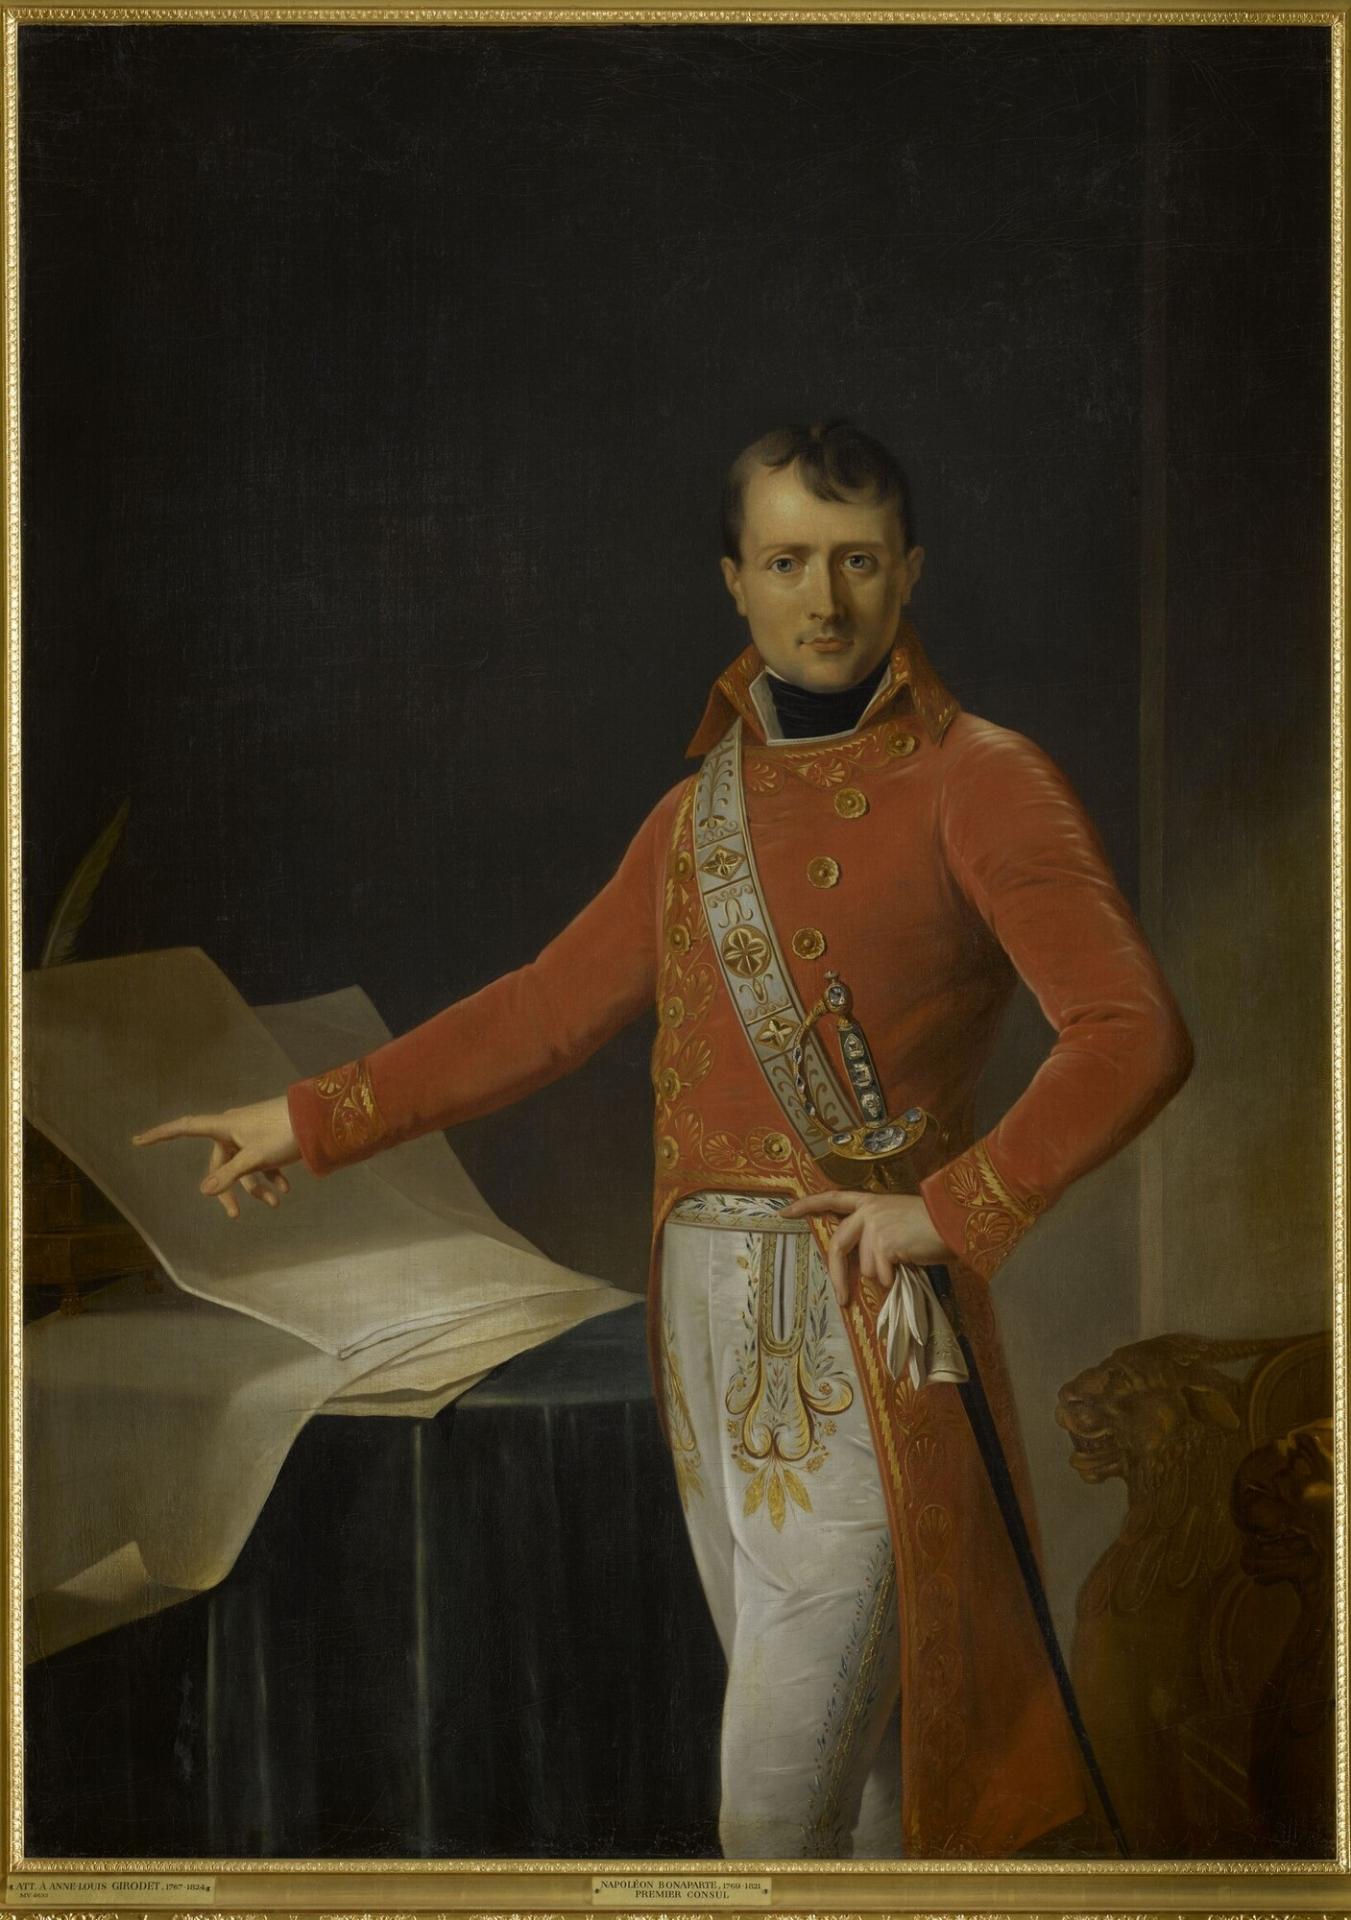 On this date in History: August 9, 1830. Accession of Louis Philippe as  King of the French.